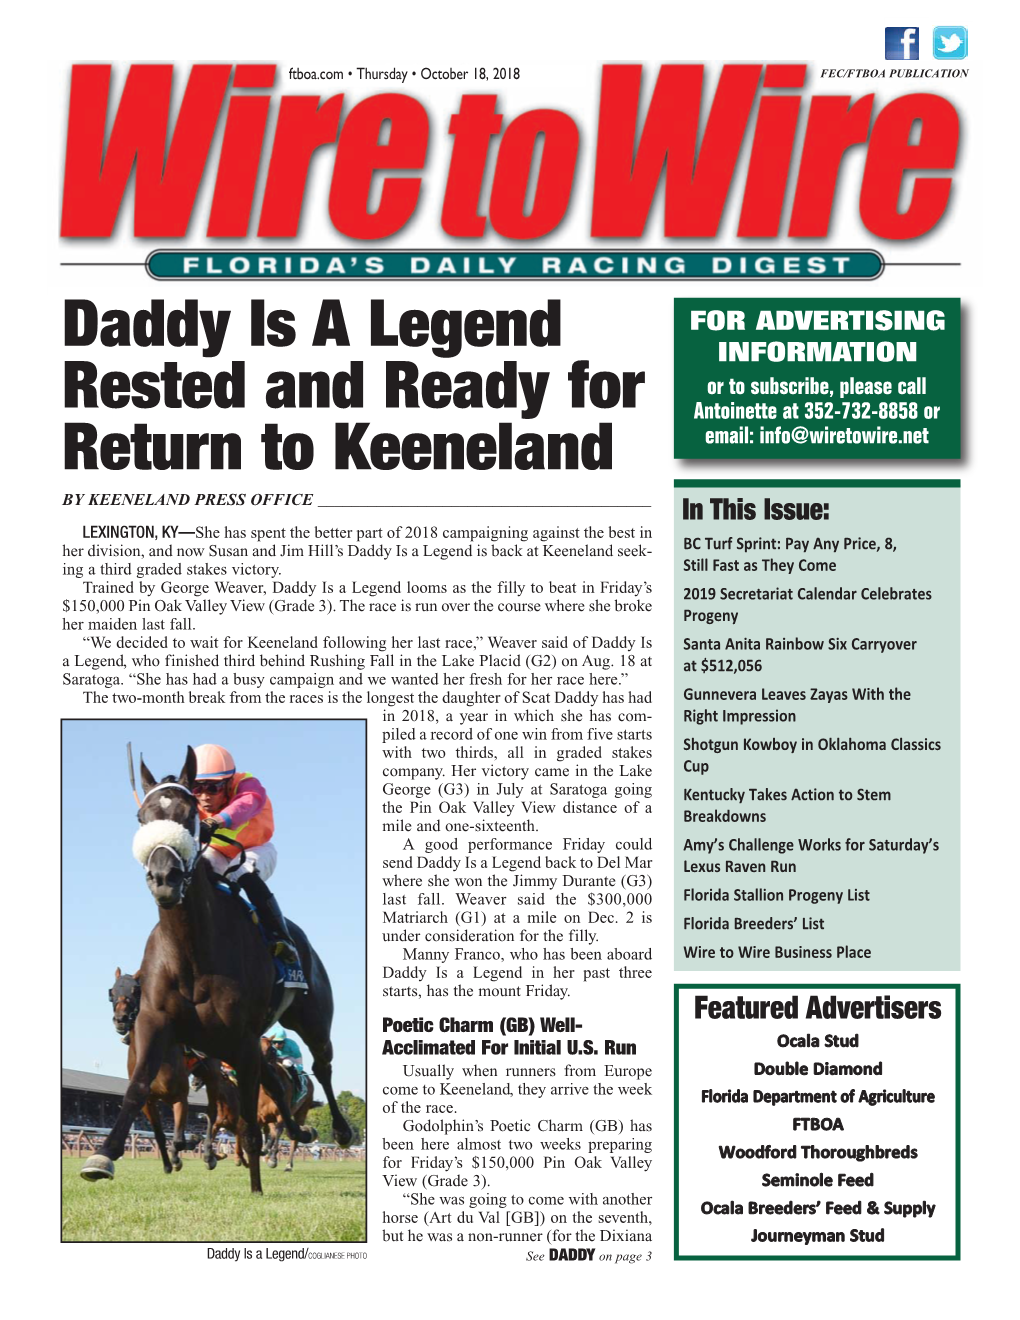 Daddy Is a Legend Rested and Ready for Return to Keeneland